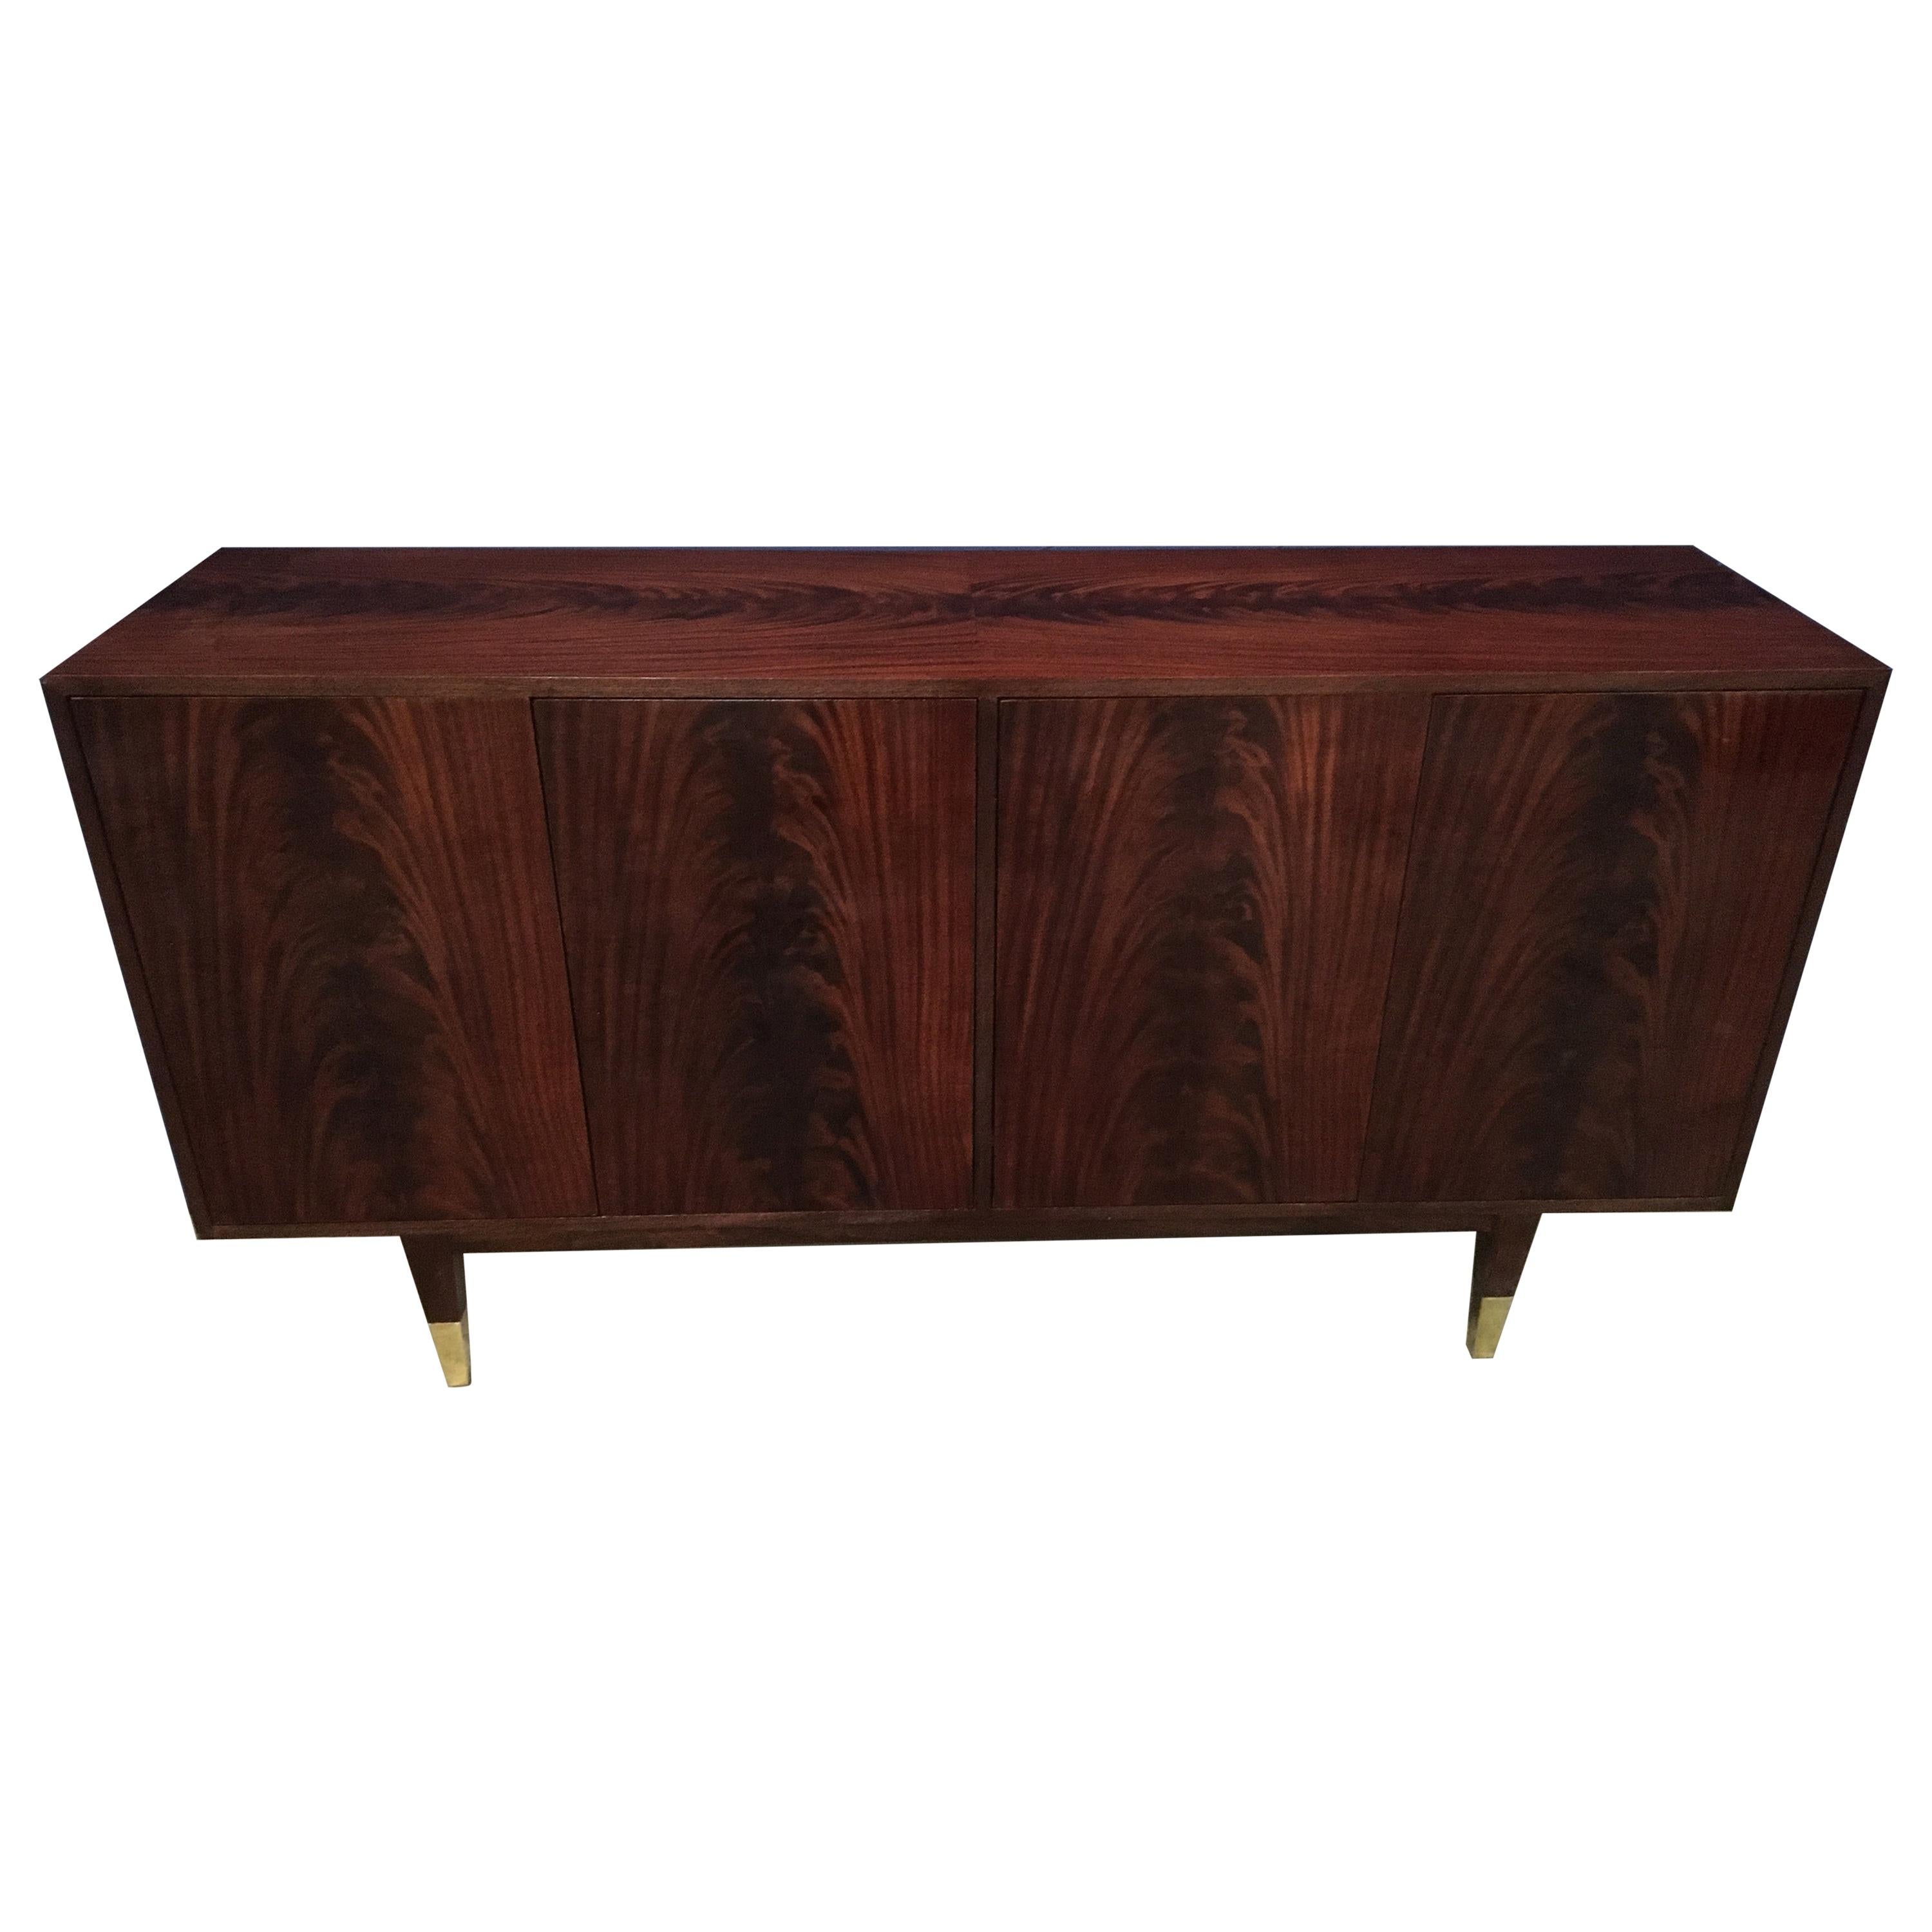 Custom Crotch Mahogany Midcentury Style Sideboard by Leighton Hall For Sale